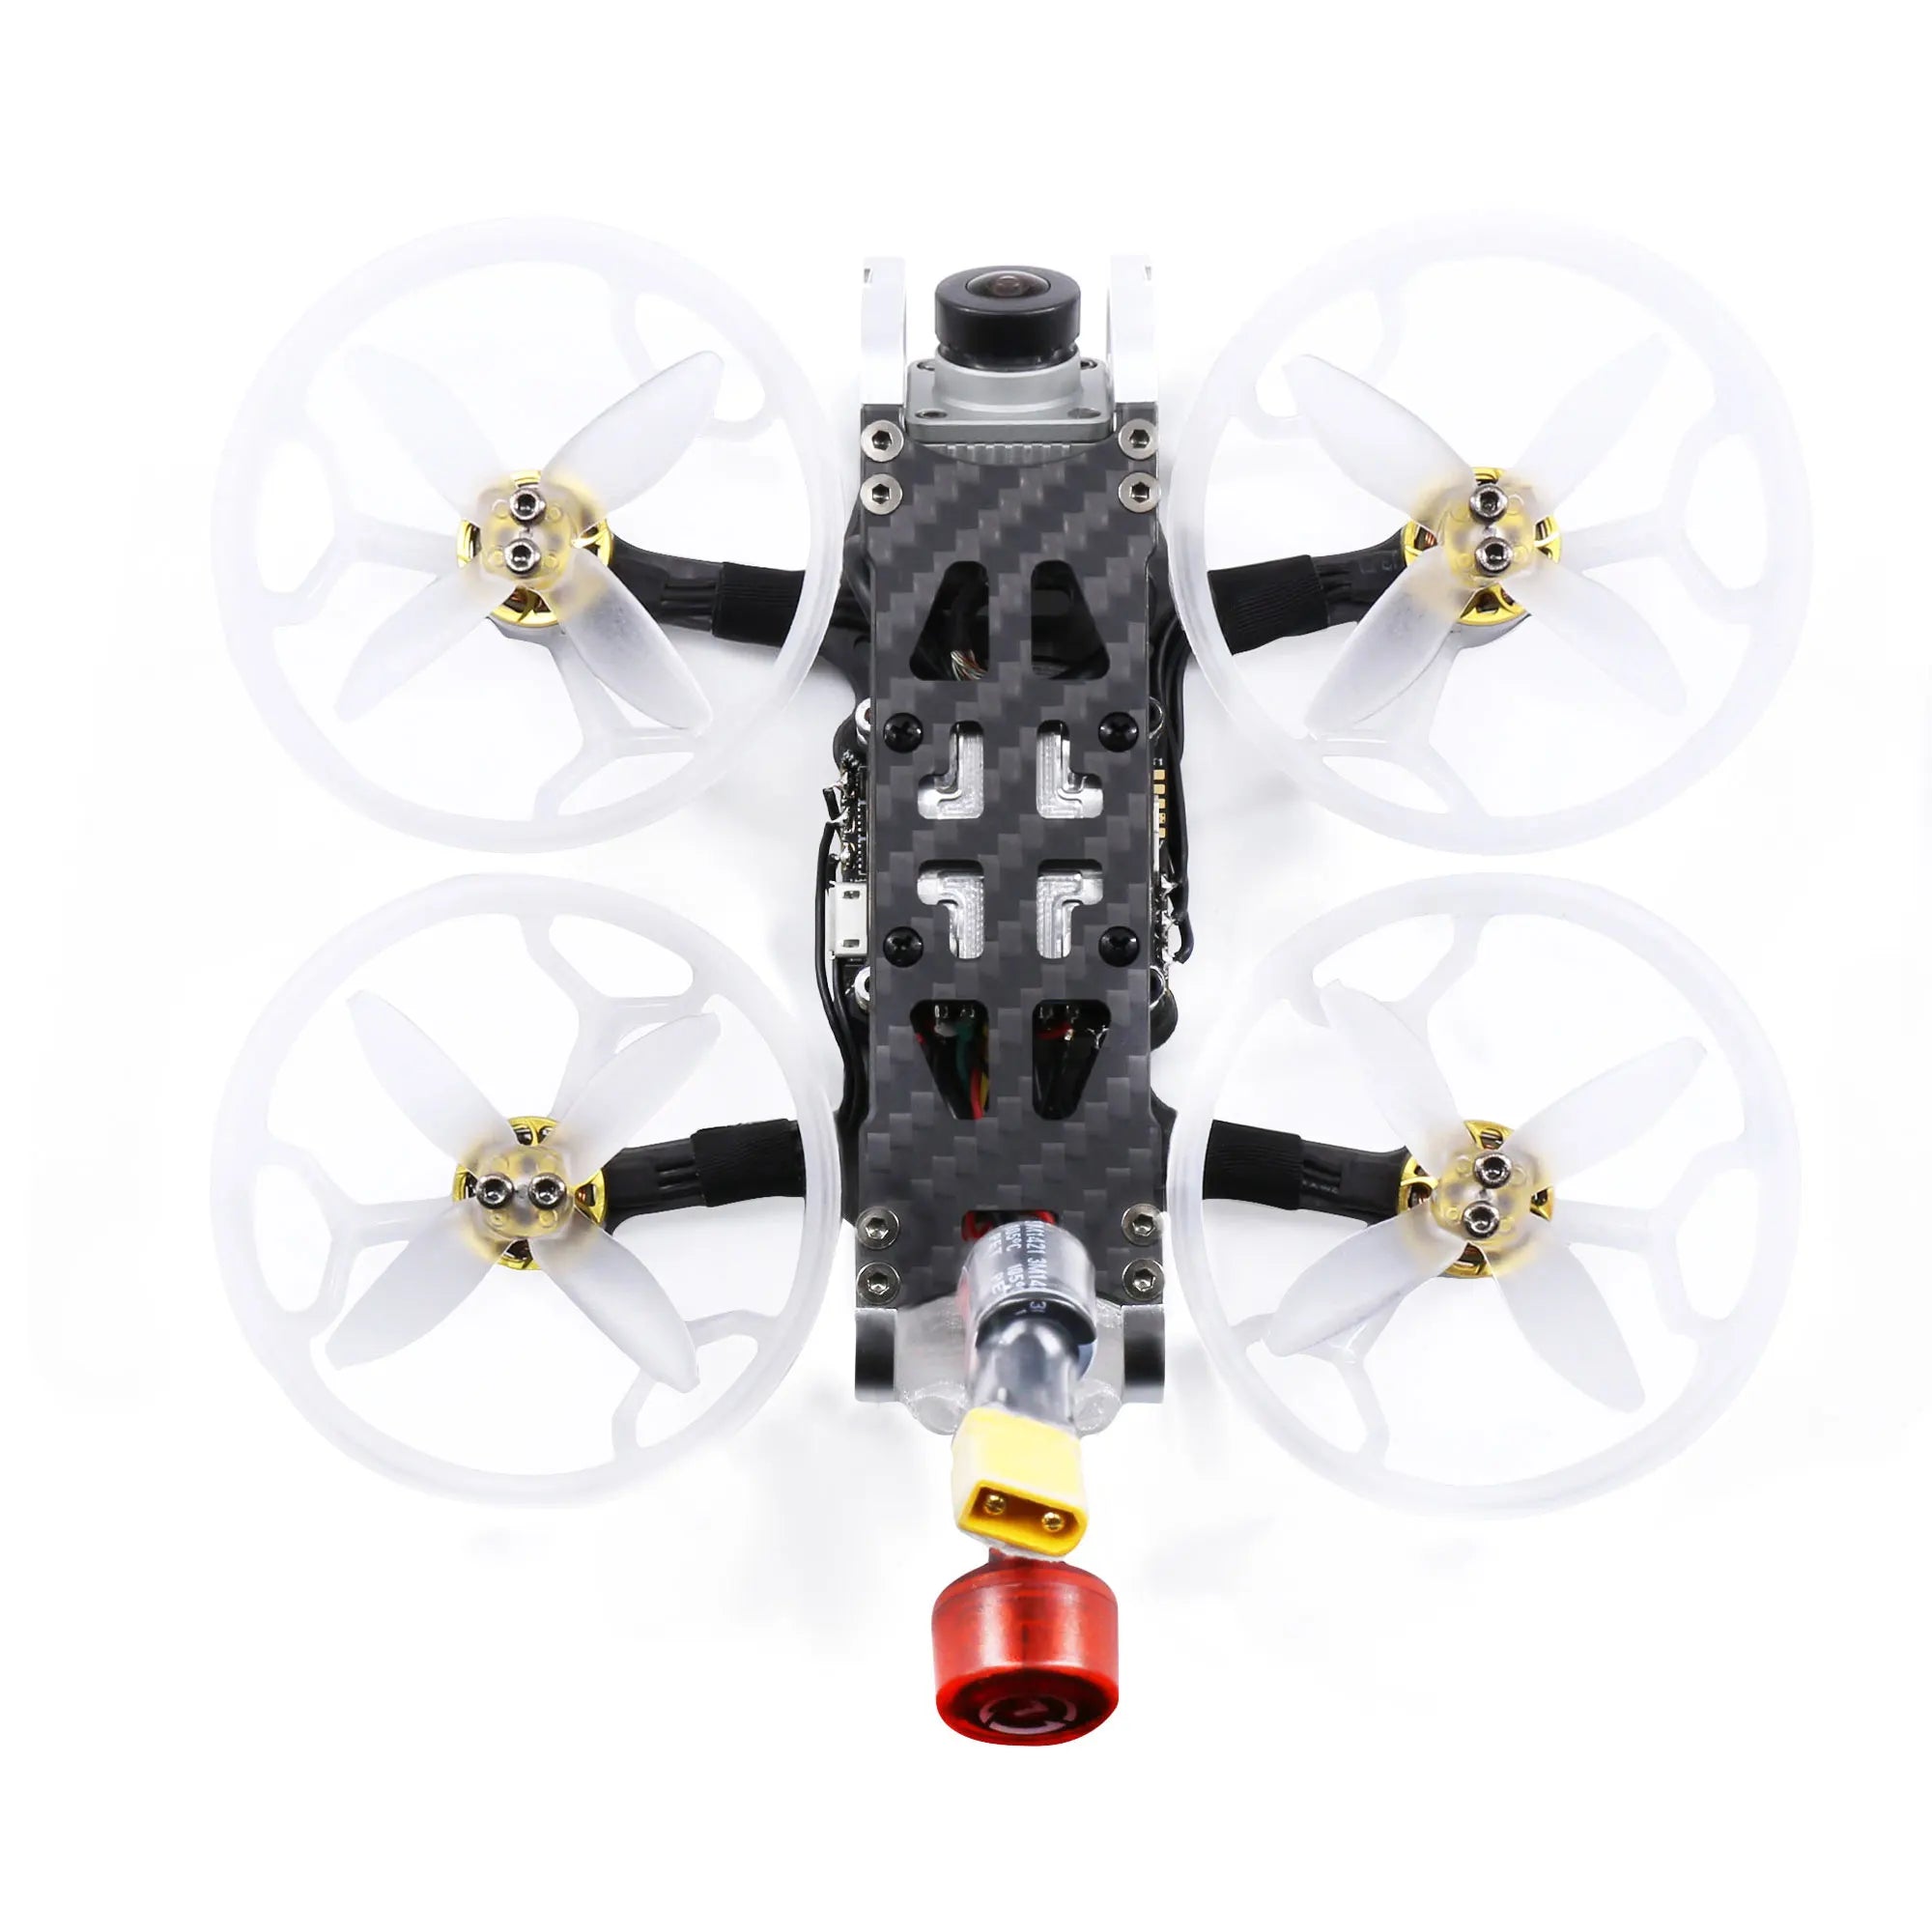 GEPRC ROCKET FPV Drone, it weighs 148g and has high playability